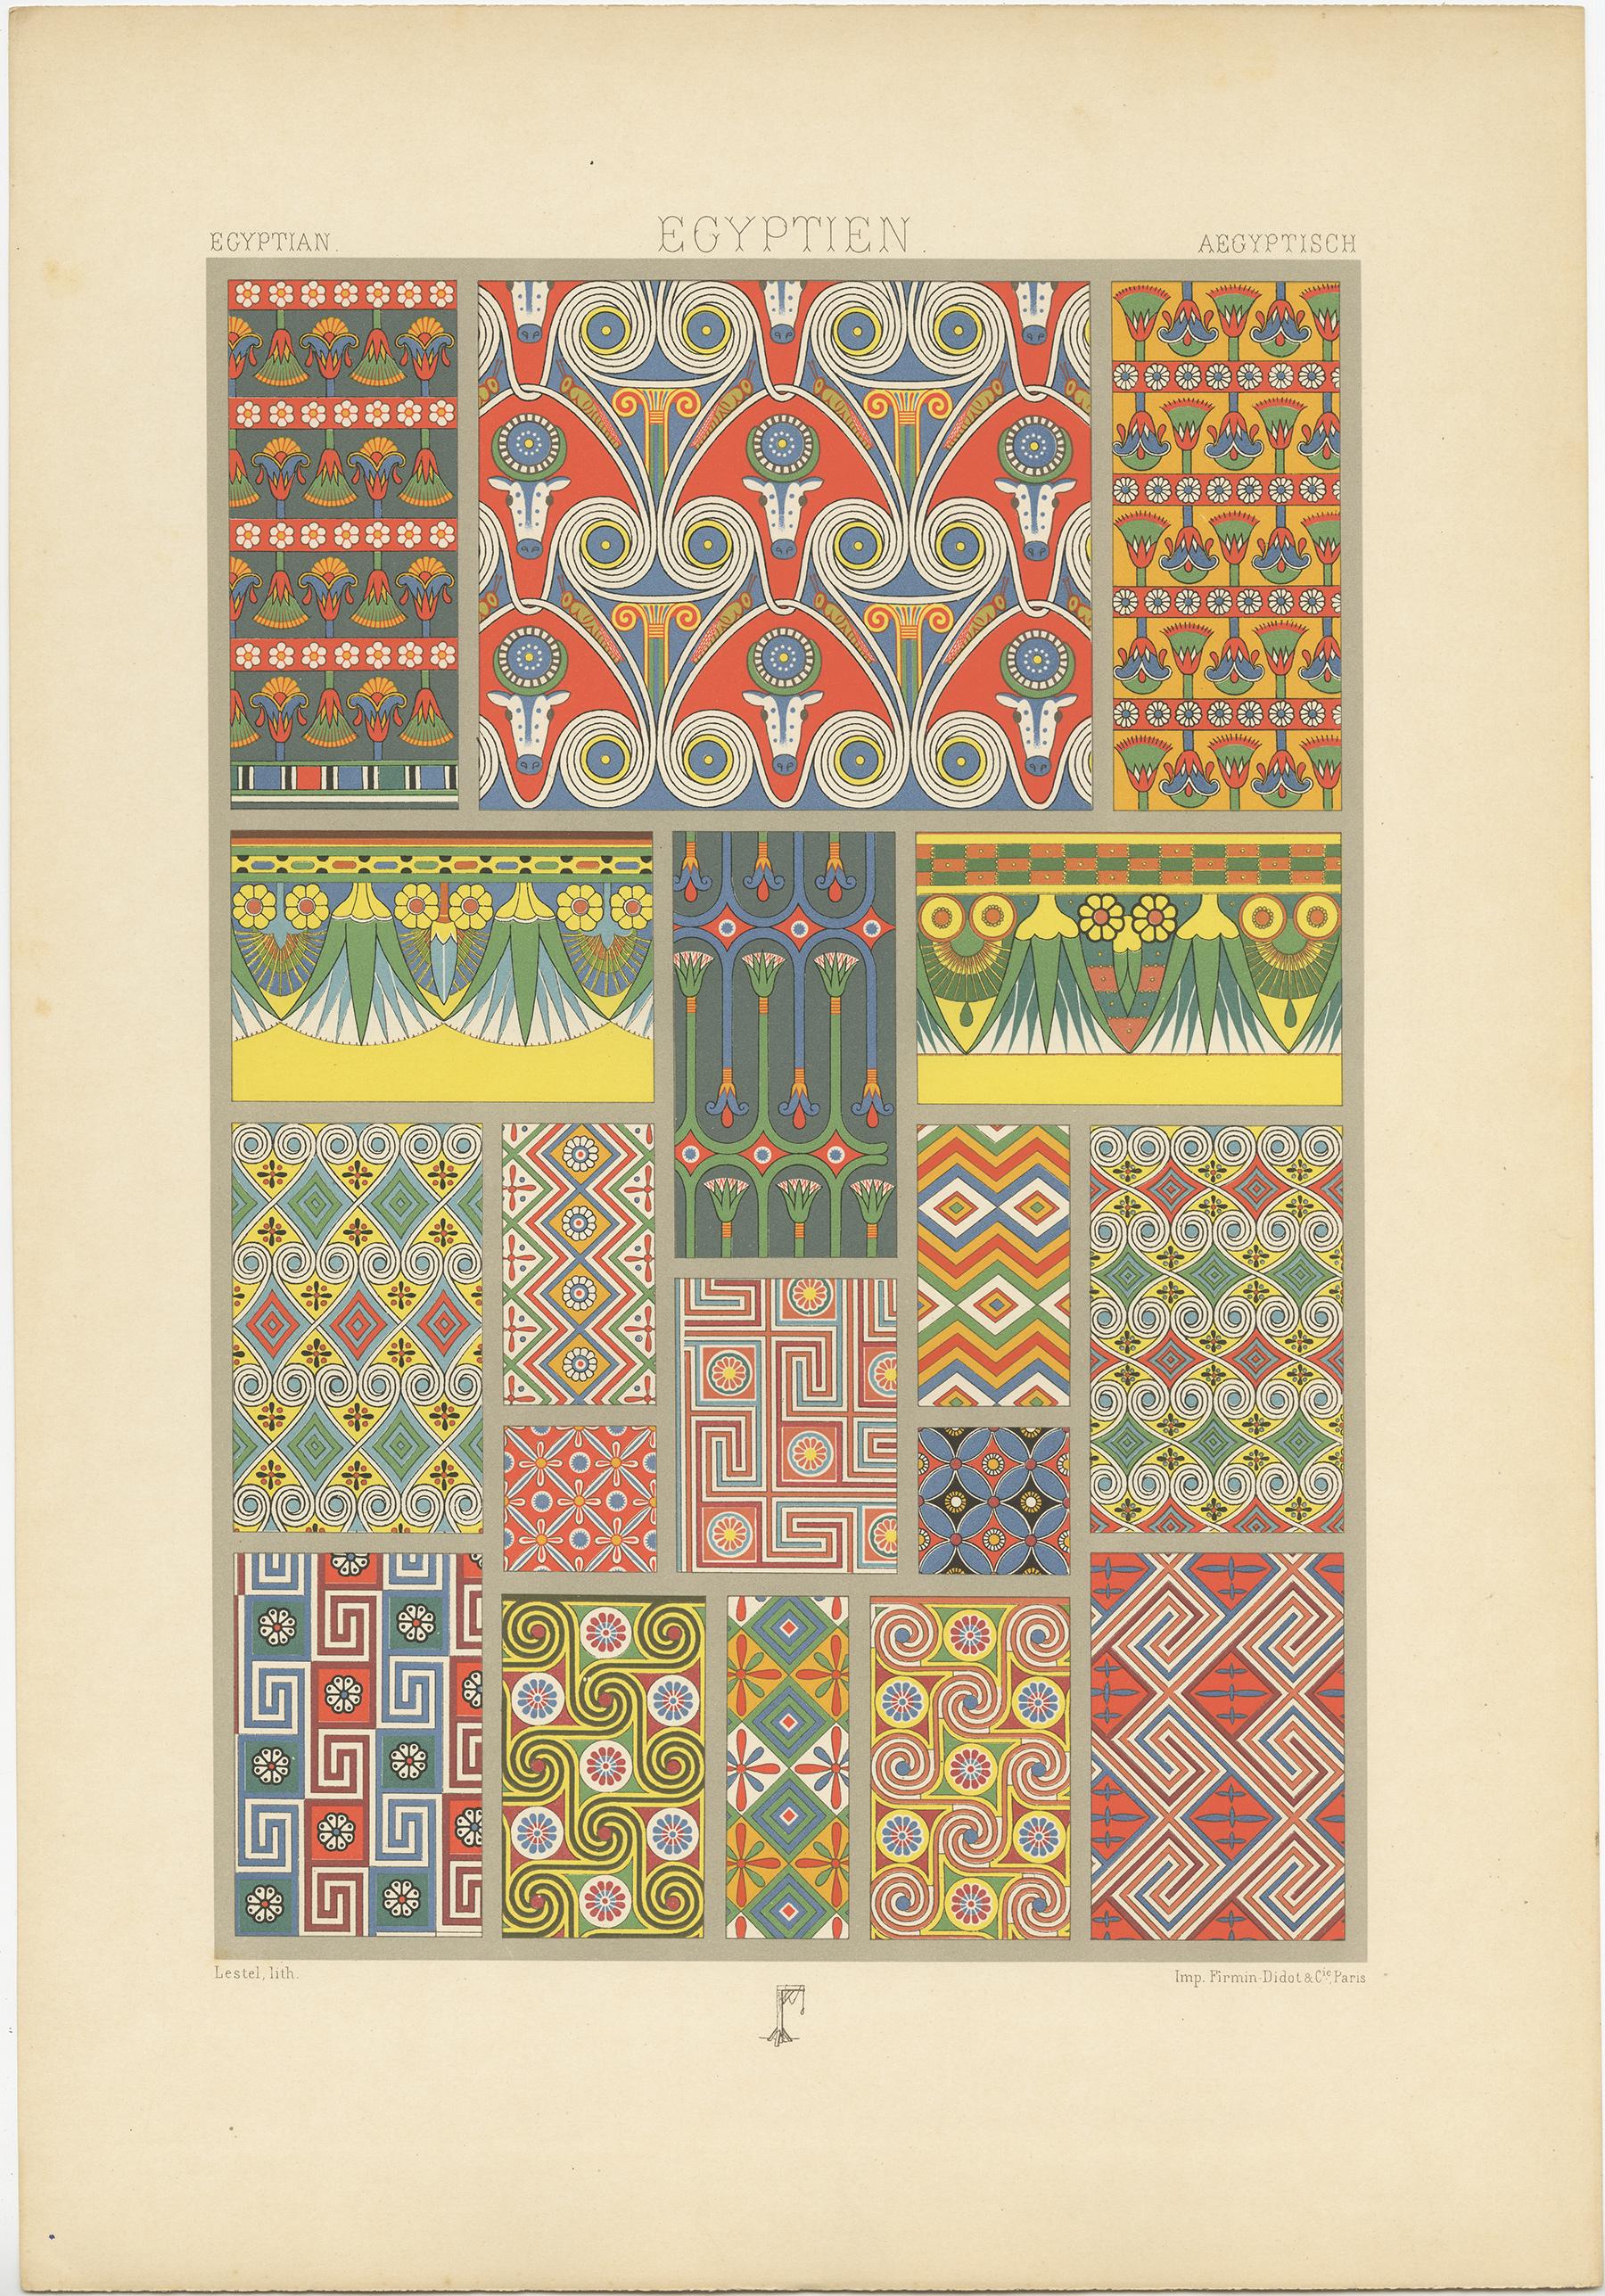 Antique print titled 'Egyptian - Egyptien - Aegyptisch'. Chromolithograph of Egyptian painted tomb ceiling and friezes ornaments. This print originates from 'l'Ornement Polychrome' by Auguste Racinet. Published circa 1890.